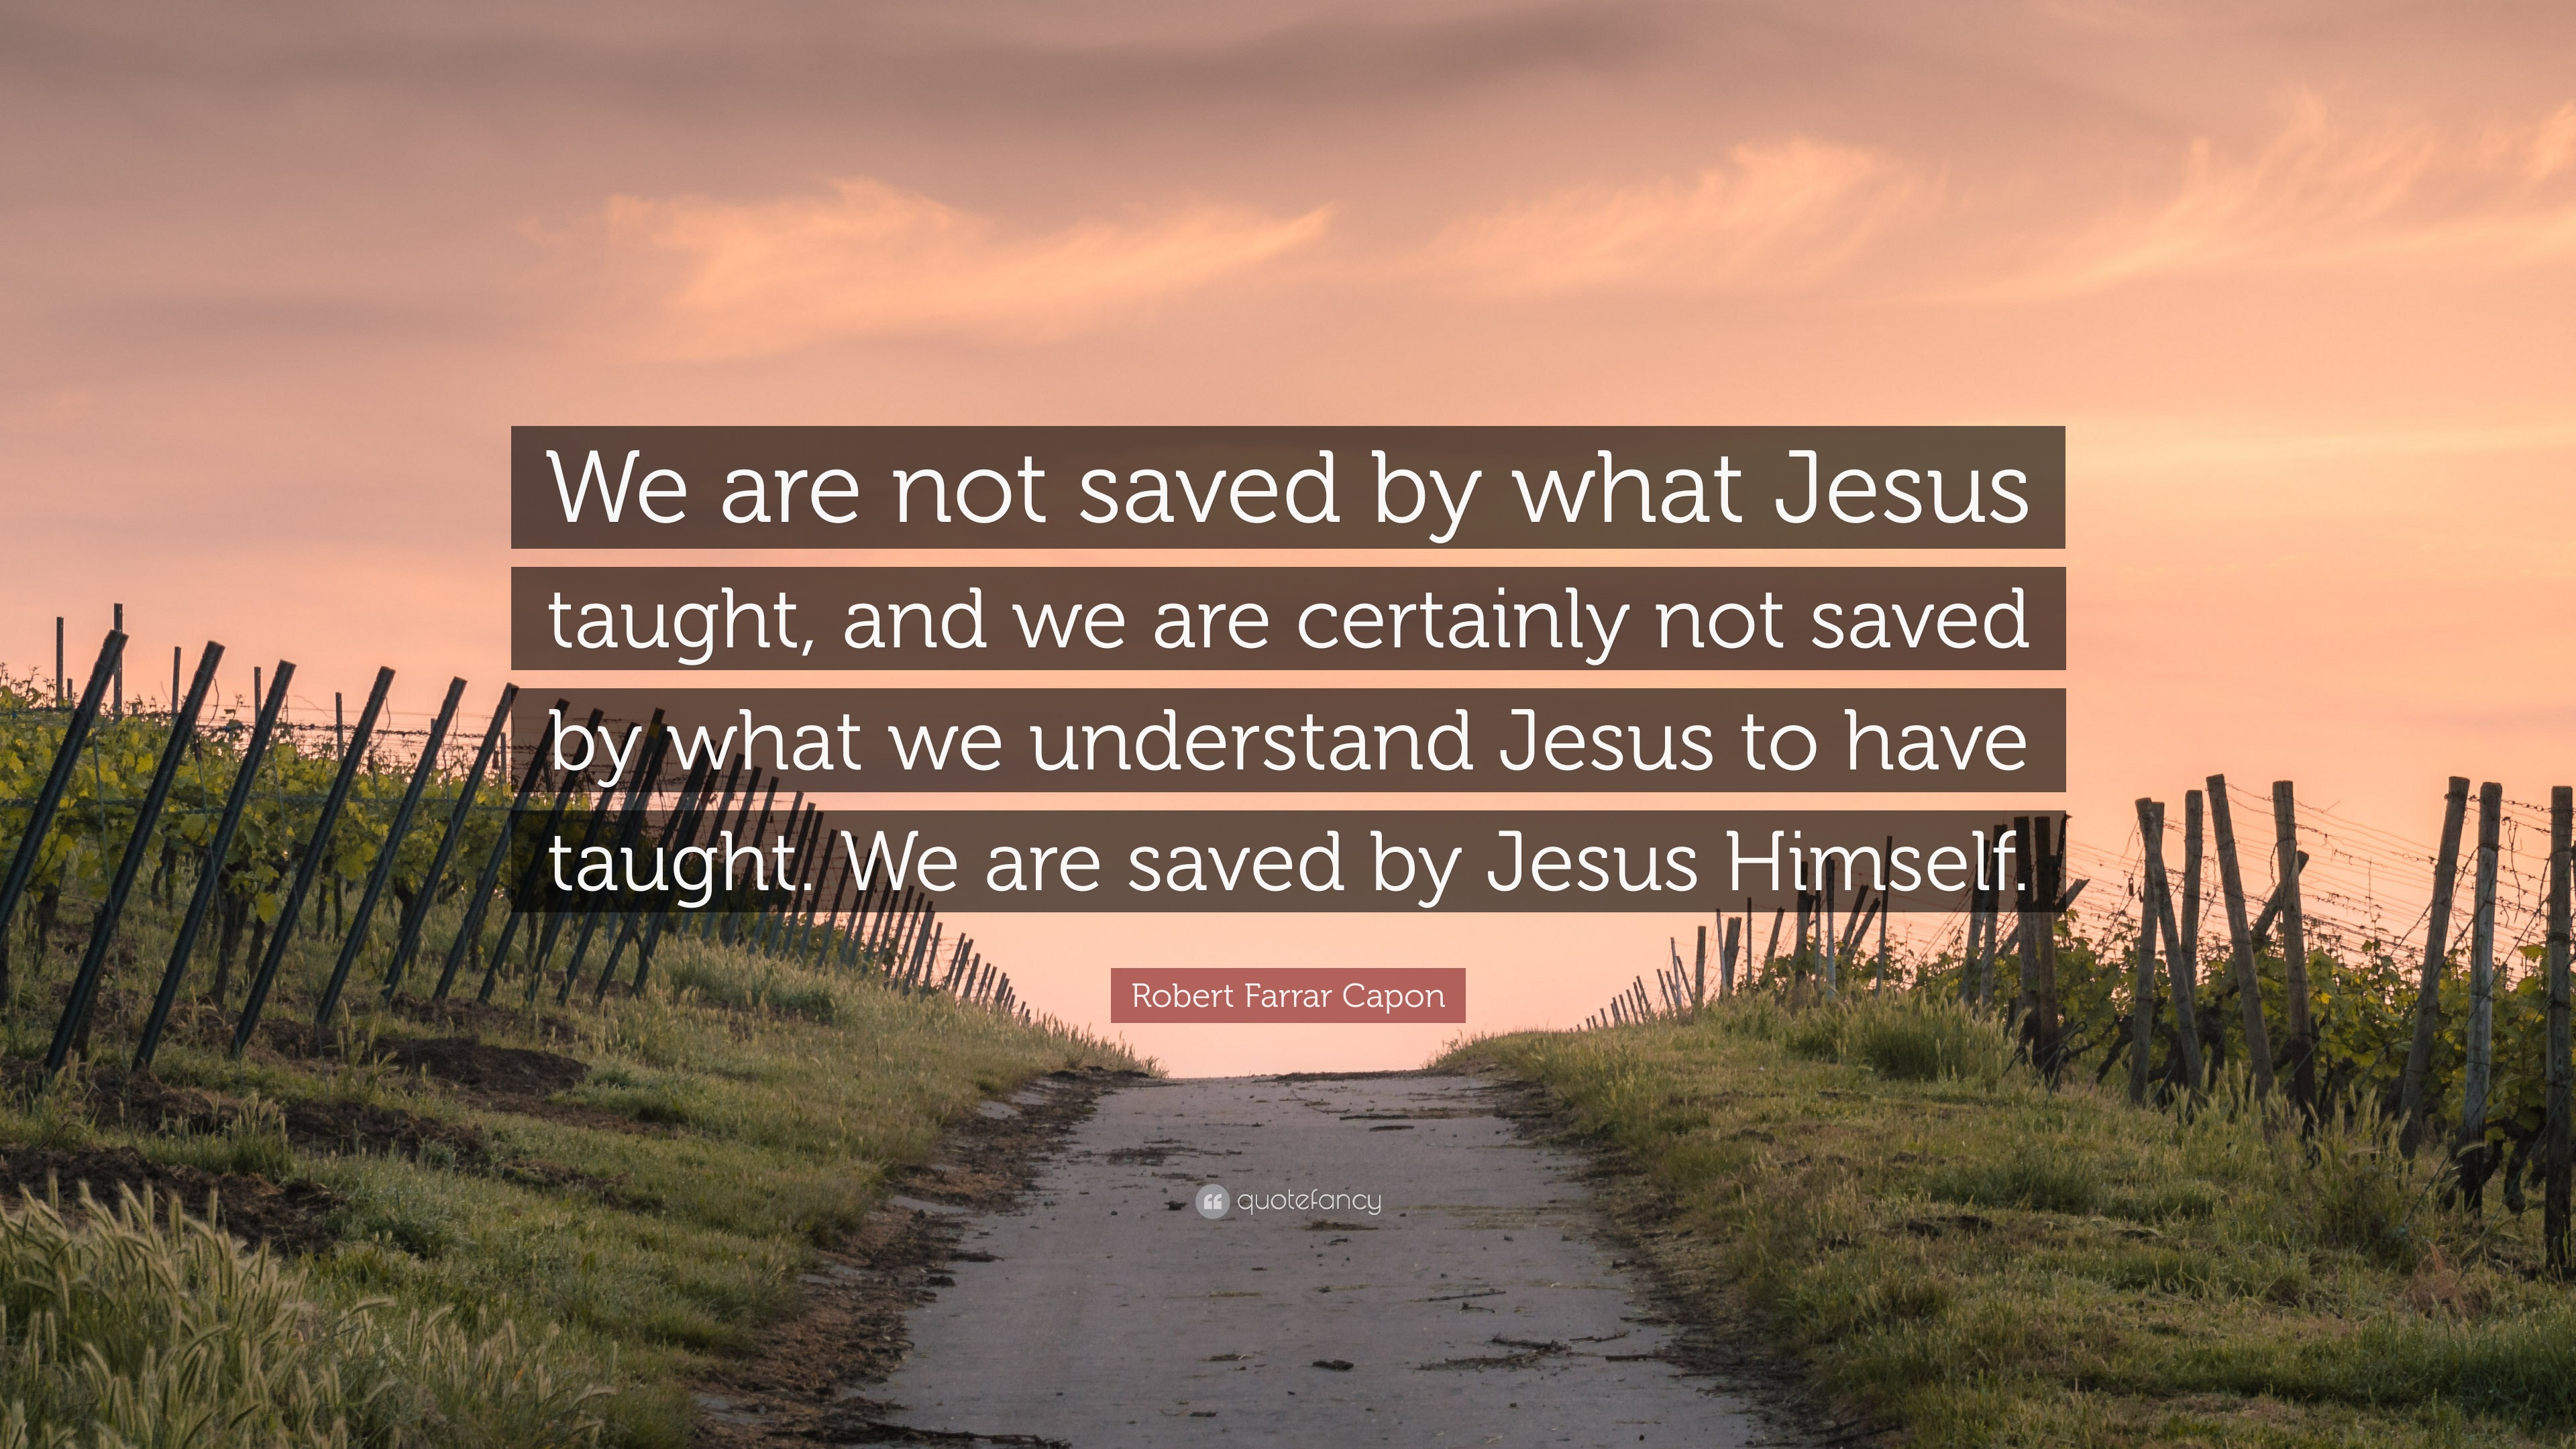 3000449-Robert-Farrar-Capon-Quote-We-are-not-saved-by-what-Jesus-taught.jpg